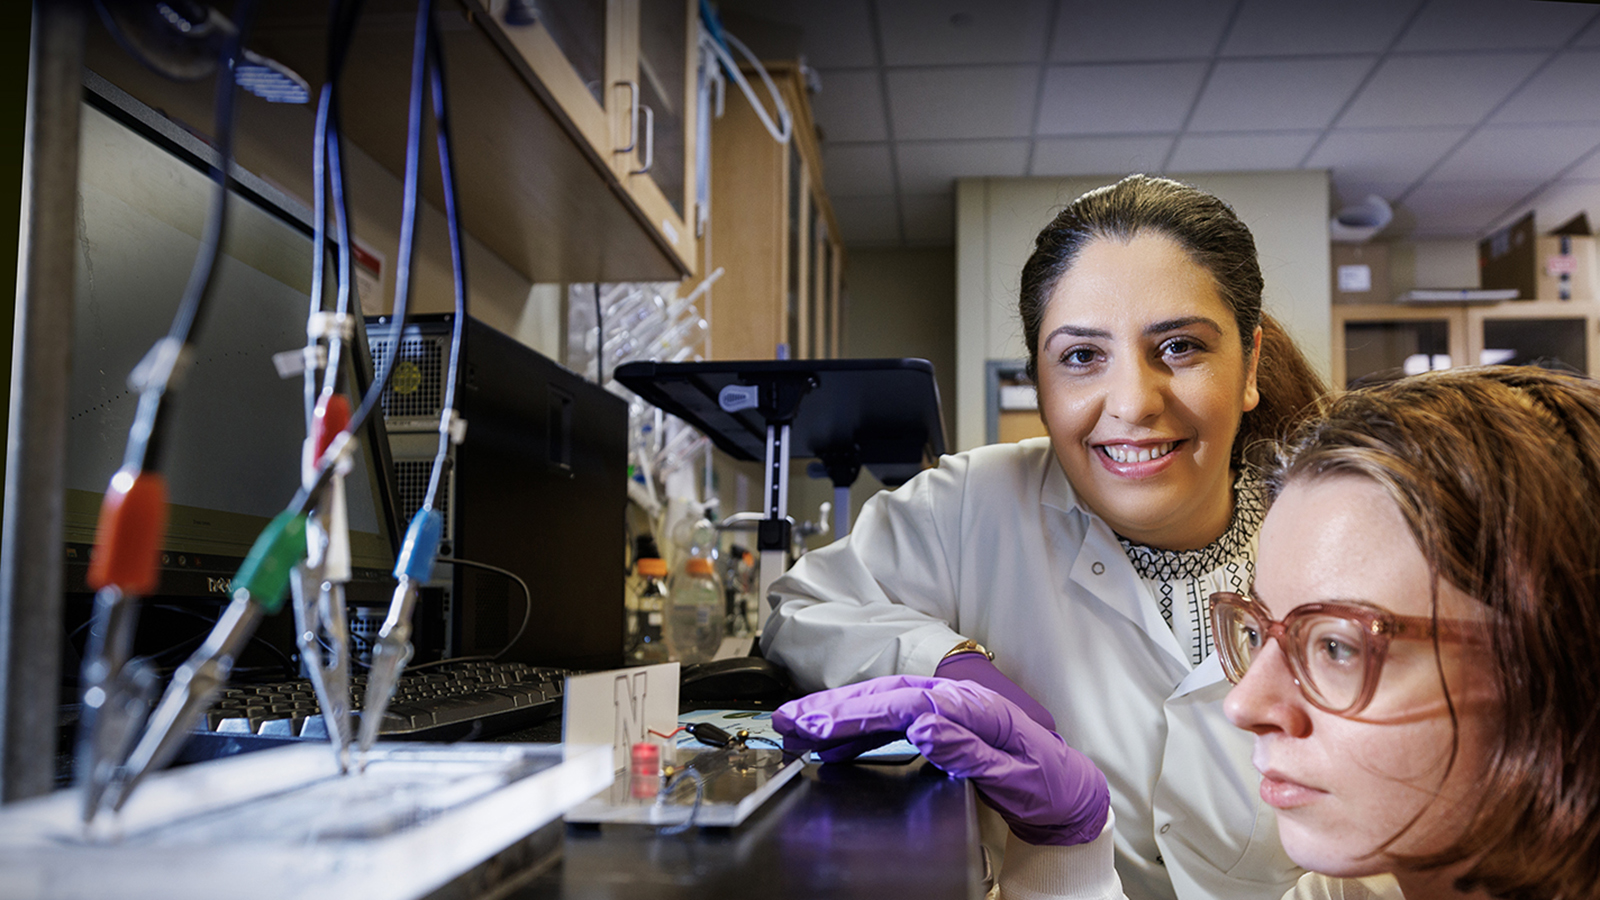 Mona Bavarian, assistant professor of chemical and biomolecular engineering at Nebraska, has received a $576,802 grant from the National Science Foundation’s Faculty Early Career Development Program to develop an advanced manufacturing platform for polymer coatings. (Craig Chandler / University Communication and Marketing)